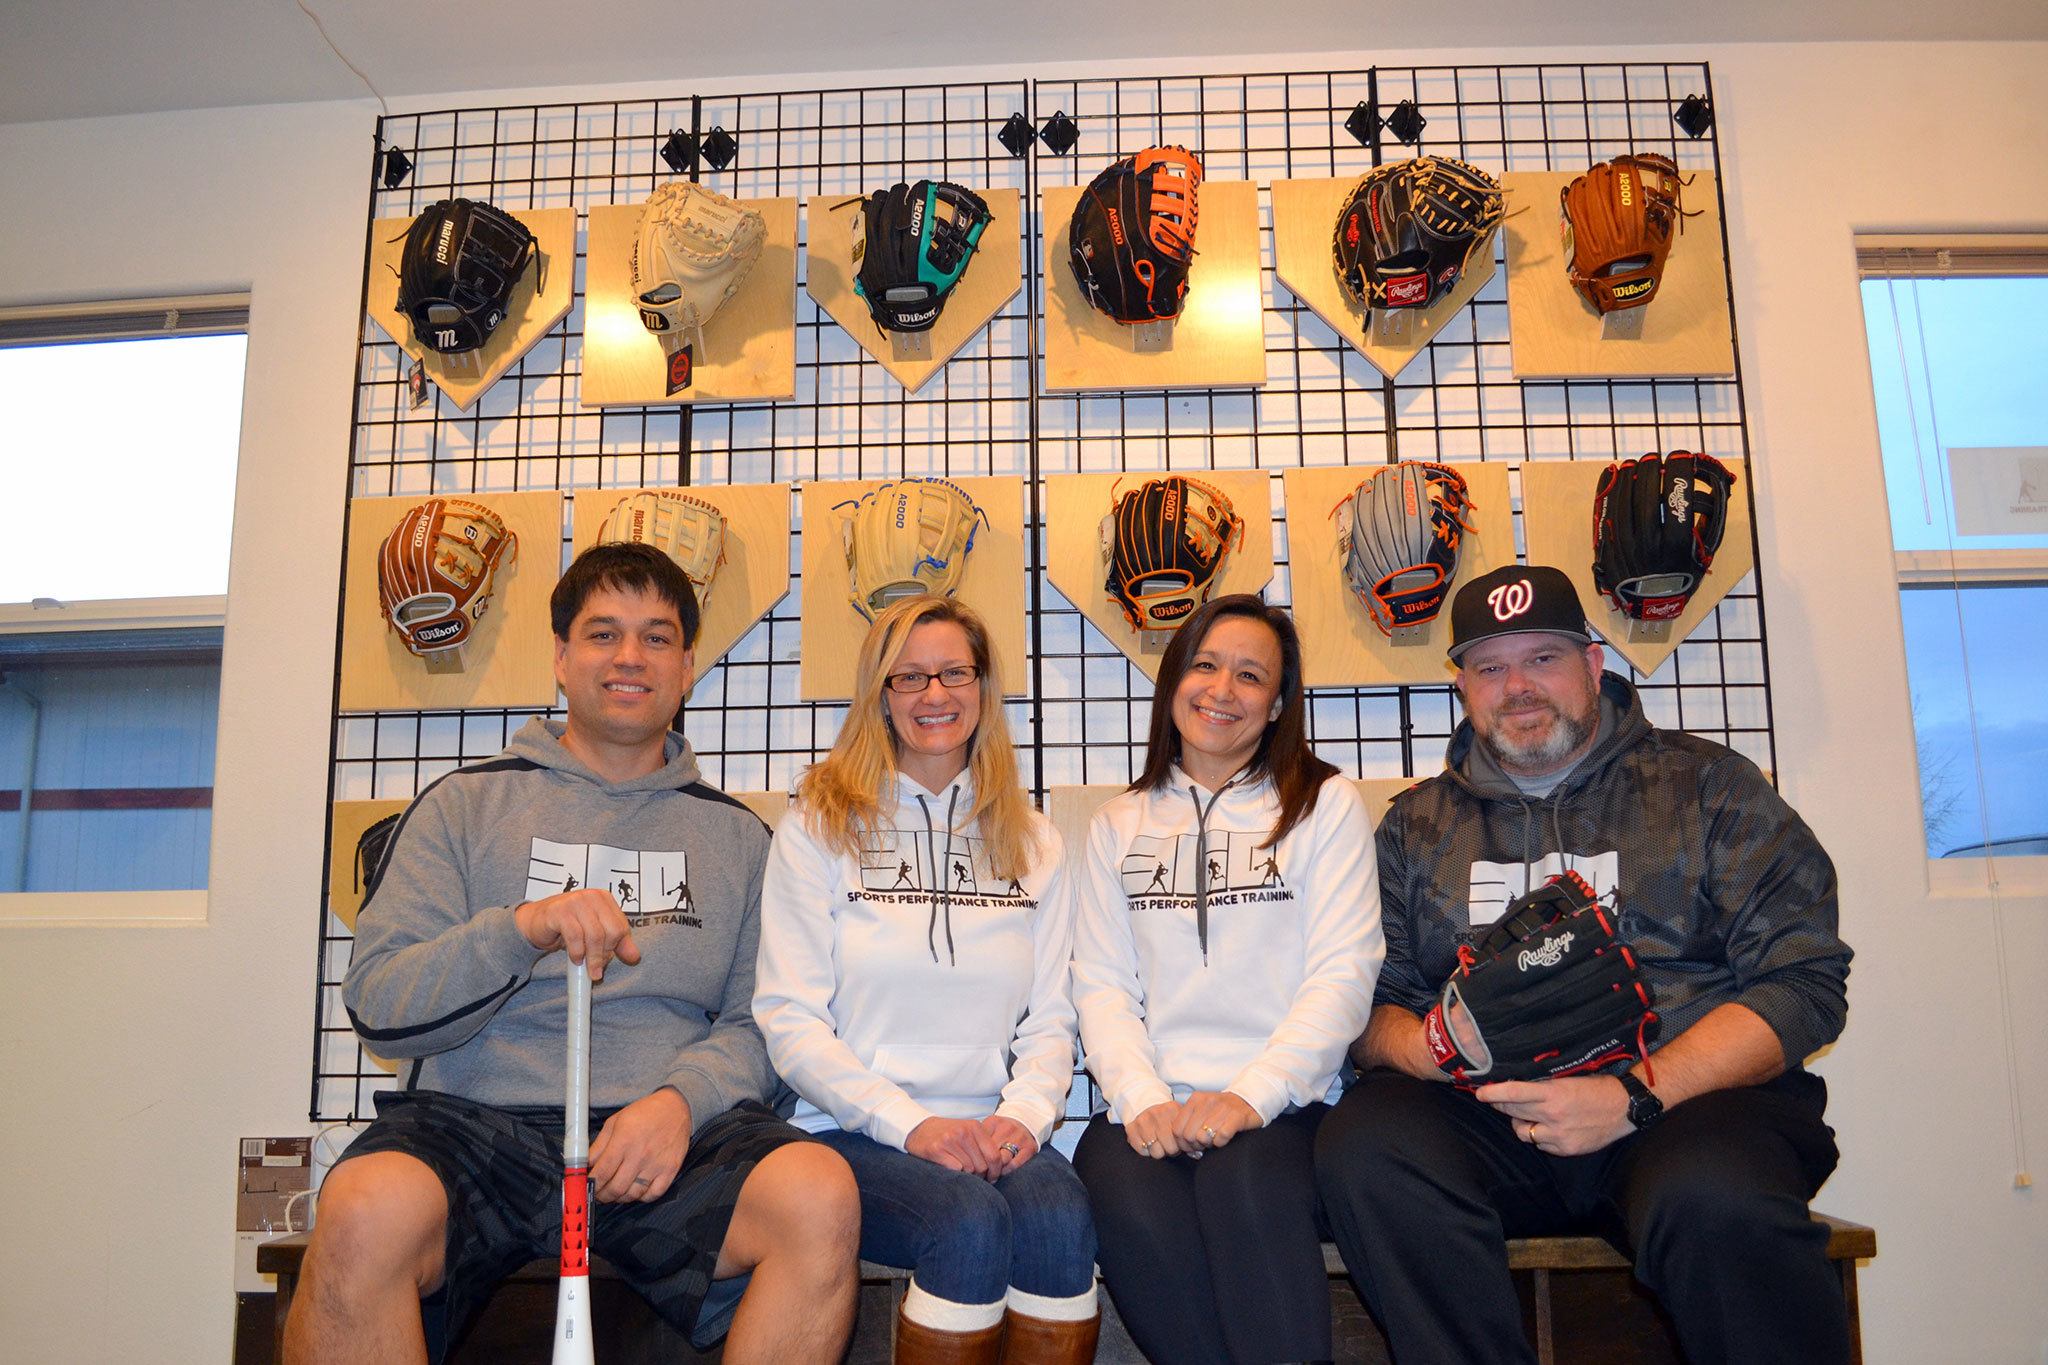 John Qualls, Lisa Jones, Diana Thompson-Young and Chris Young co-own 360 Sporting Goods, which offers high-quality equipment for baseball and softball players that they can try out. Sequim Gazette photos by Matthew Nash